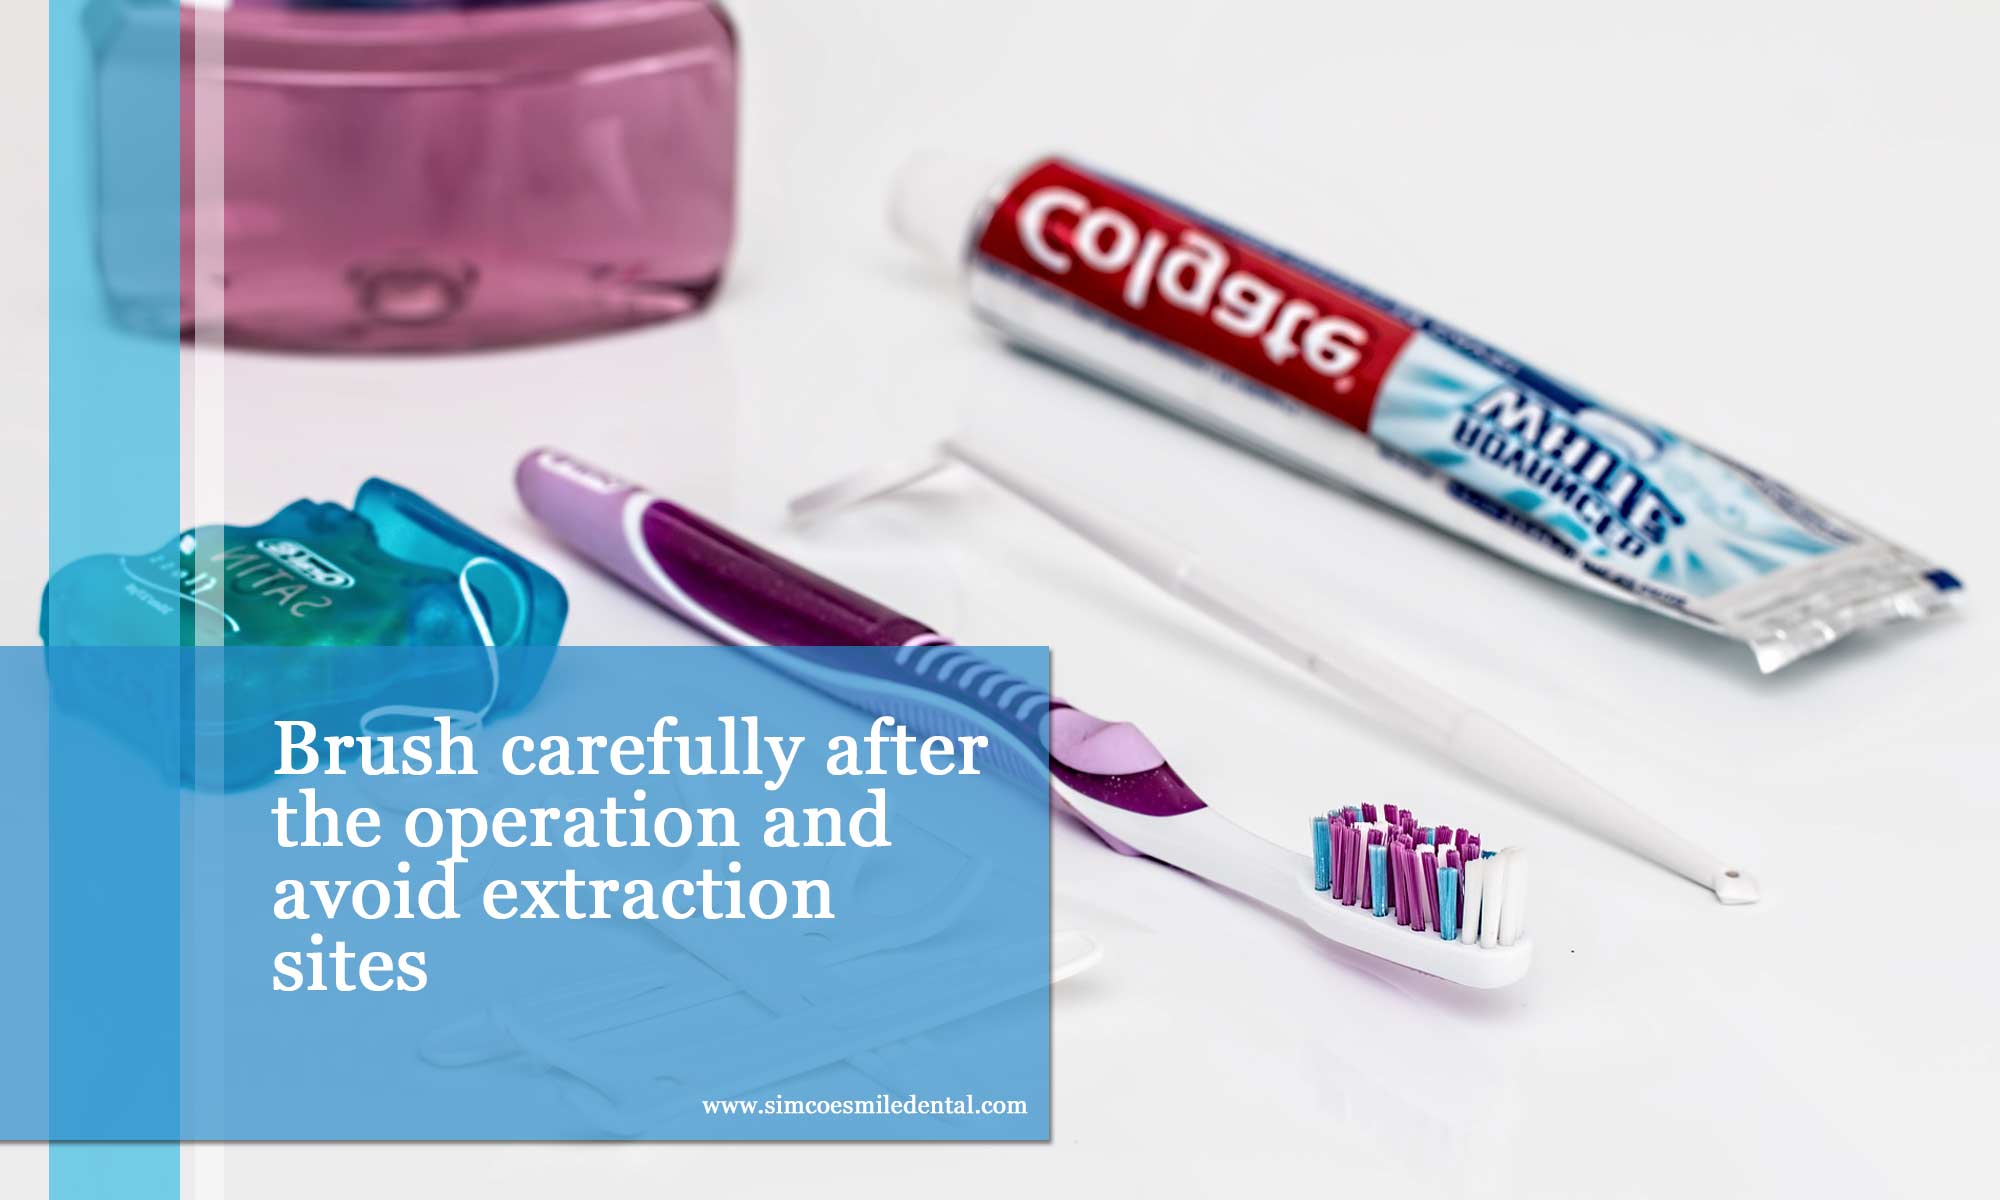 Brush carefully after the operation and avoid extraction sites